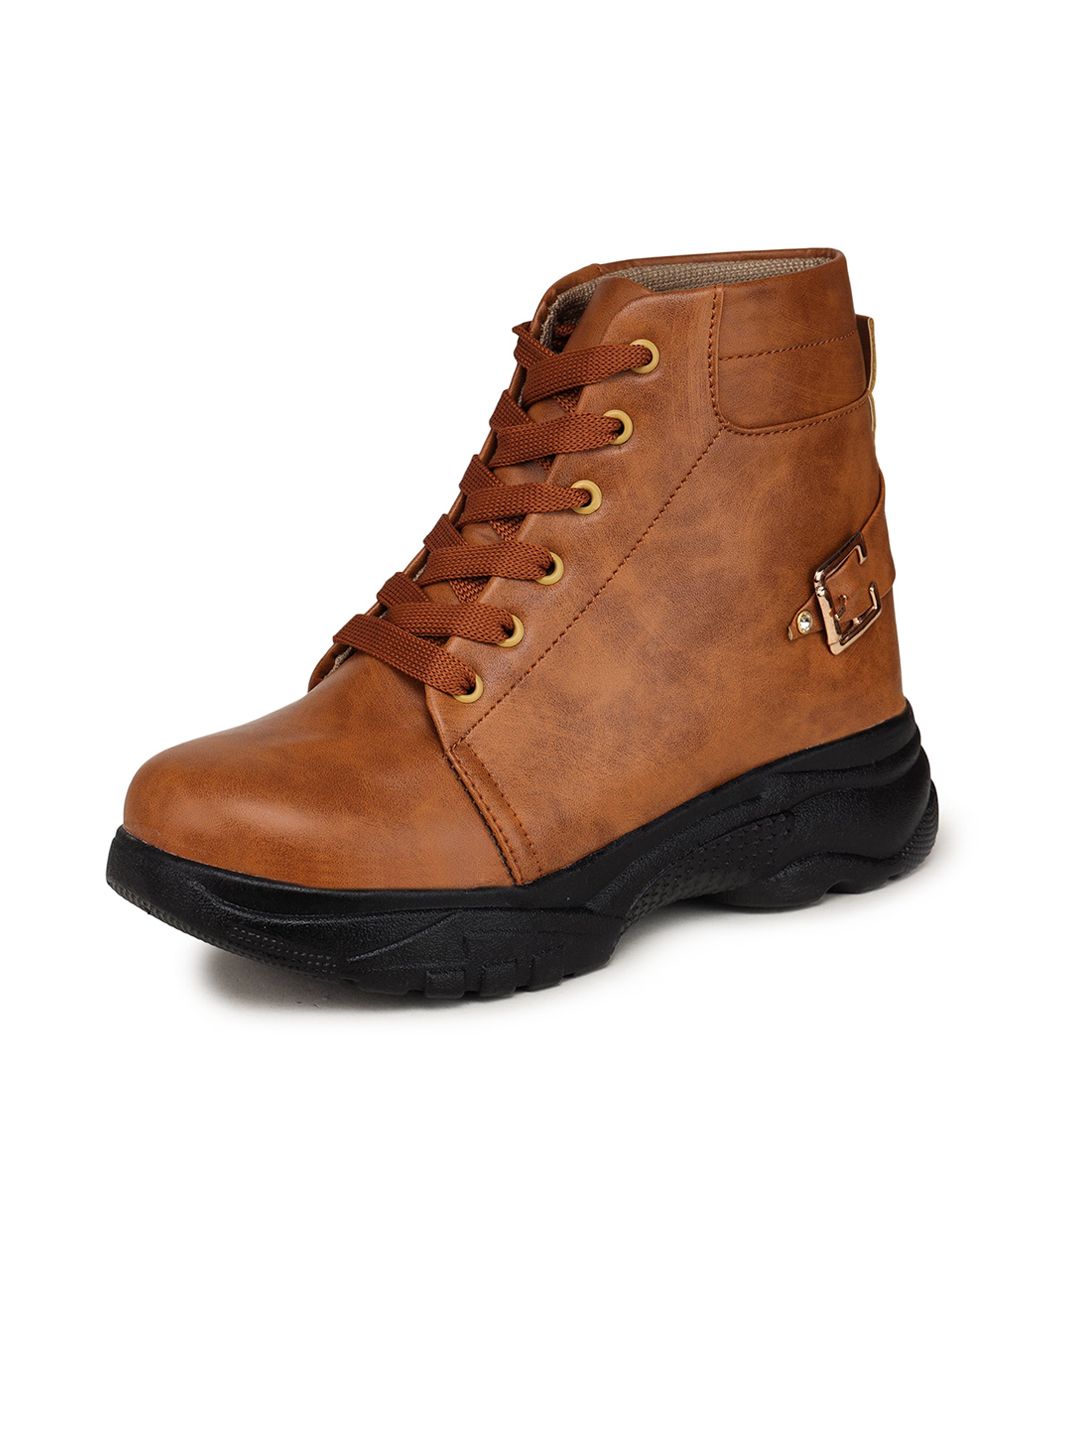 BOOTCO Women Brown & Black Solid Heeled Light Weight Boots Price in India